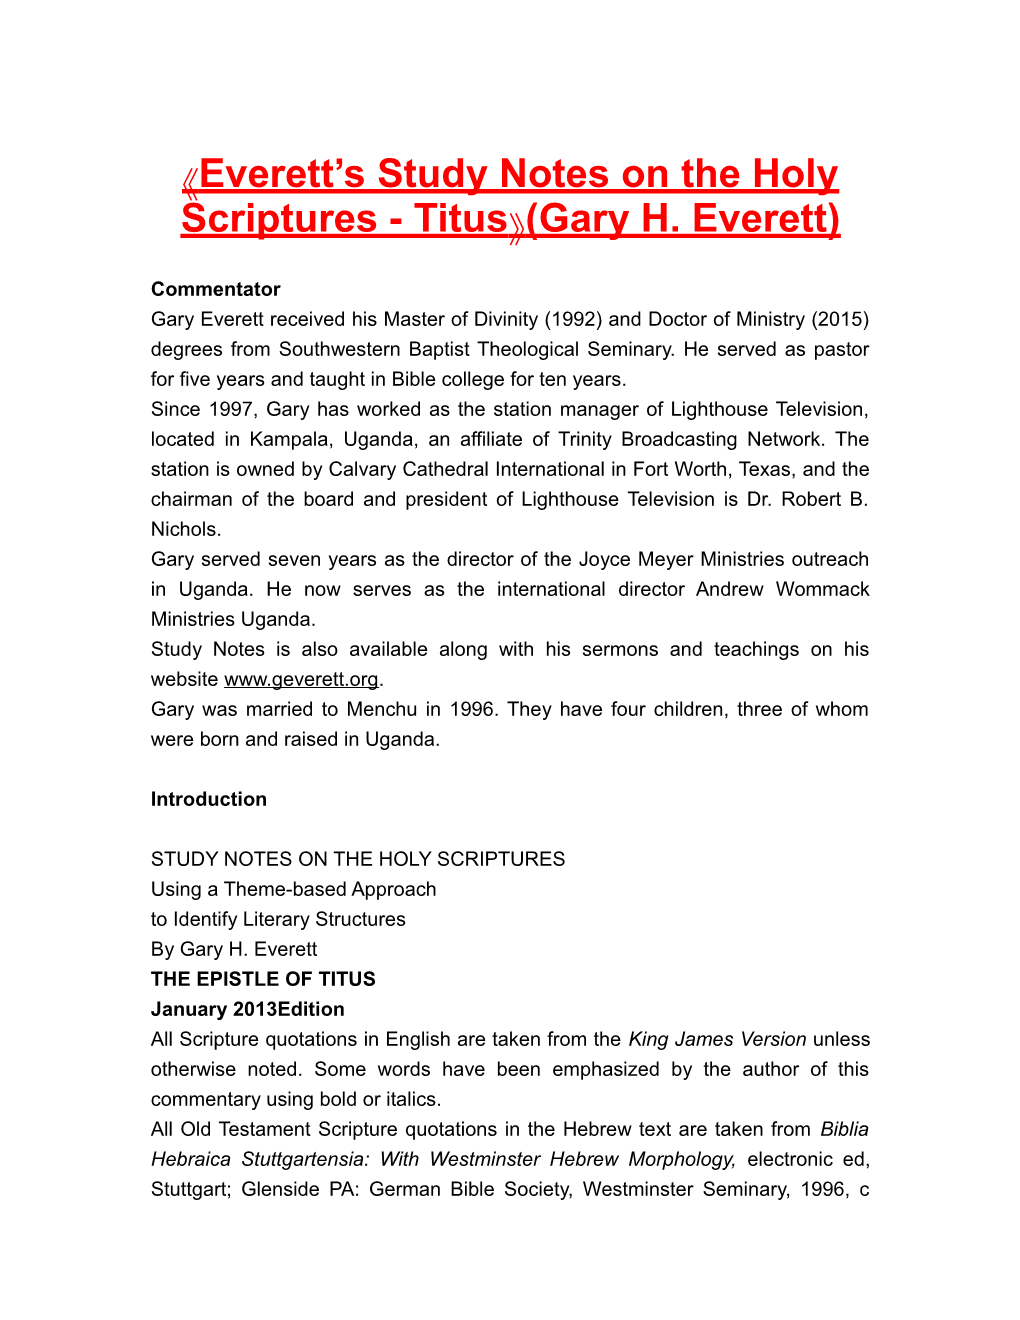 Everett S Study Notes on the Holy Scriptures - Titus (Gary H. Everett)